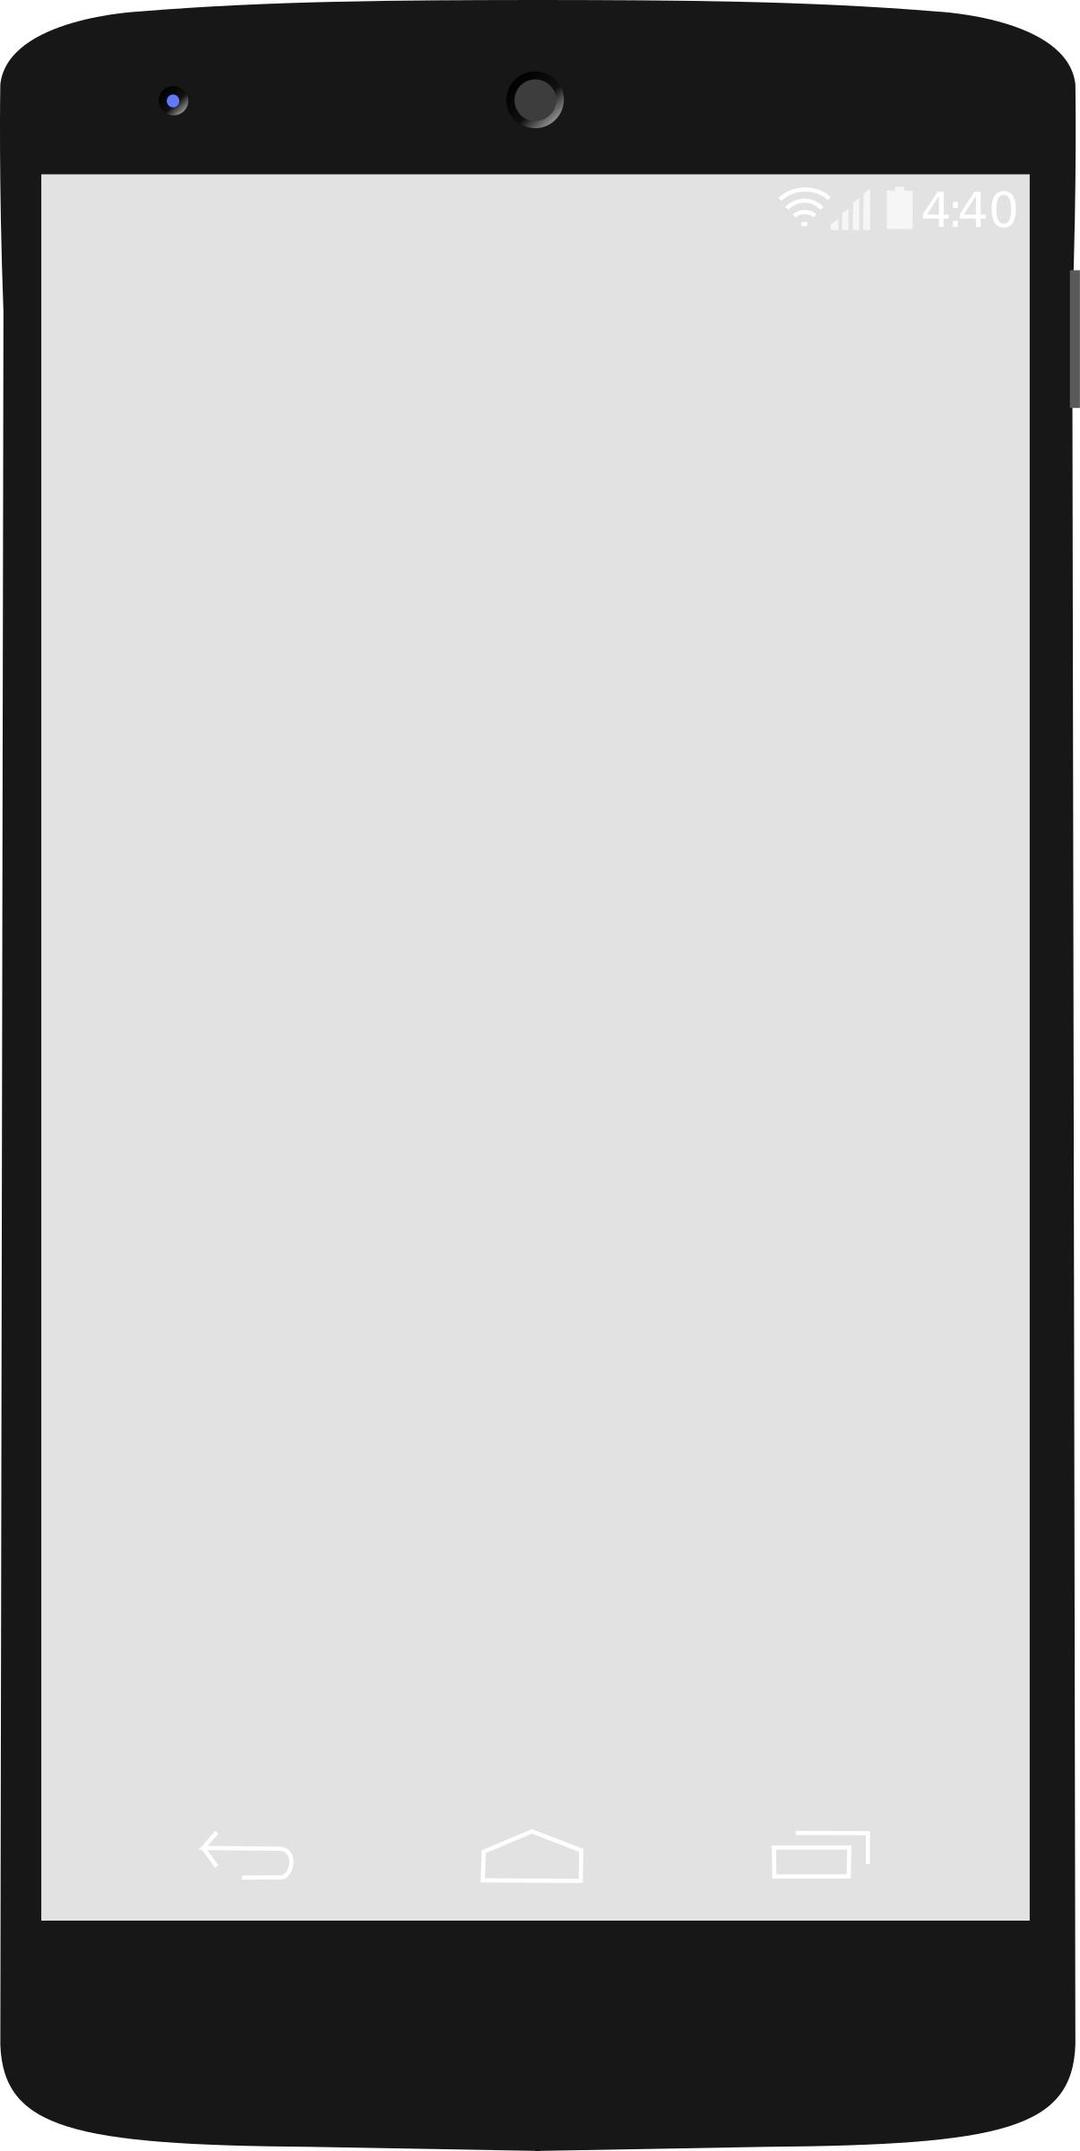 Nexus 5 for application prototyping png transparent